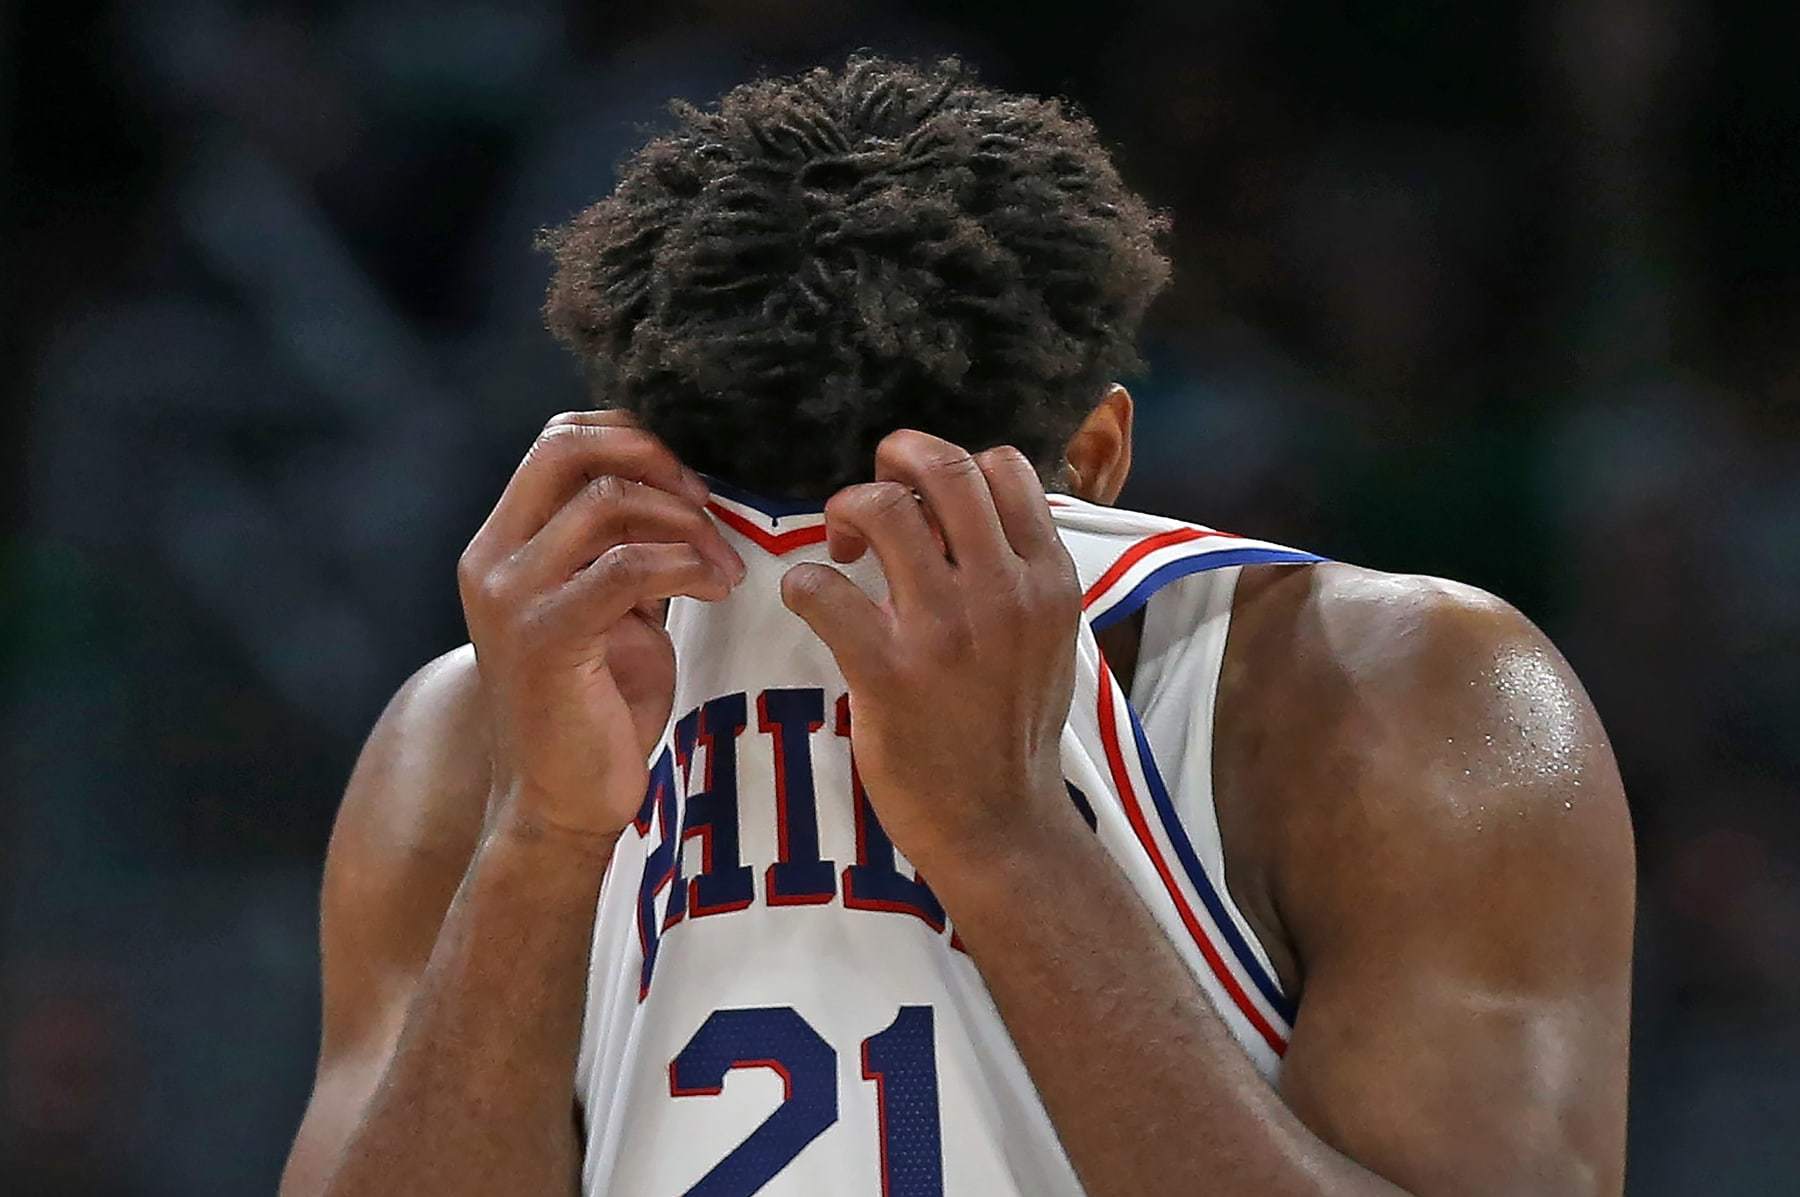 Potential Joel Embiid trade request looms large over Sixers